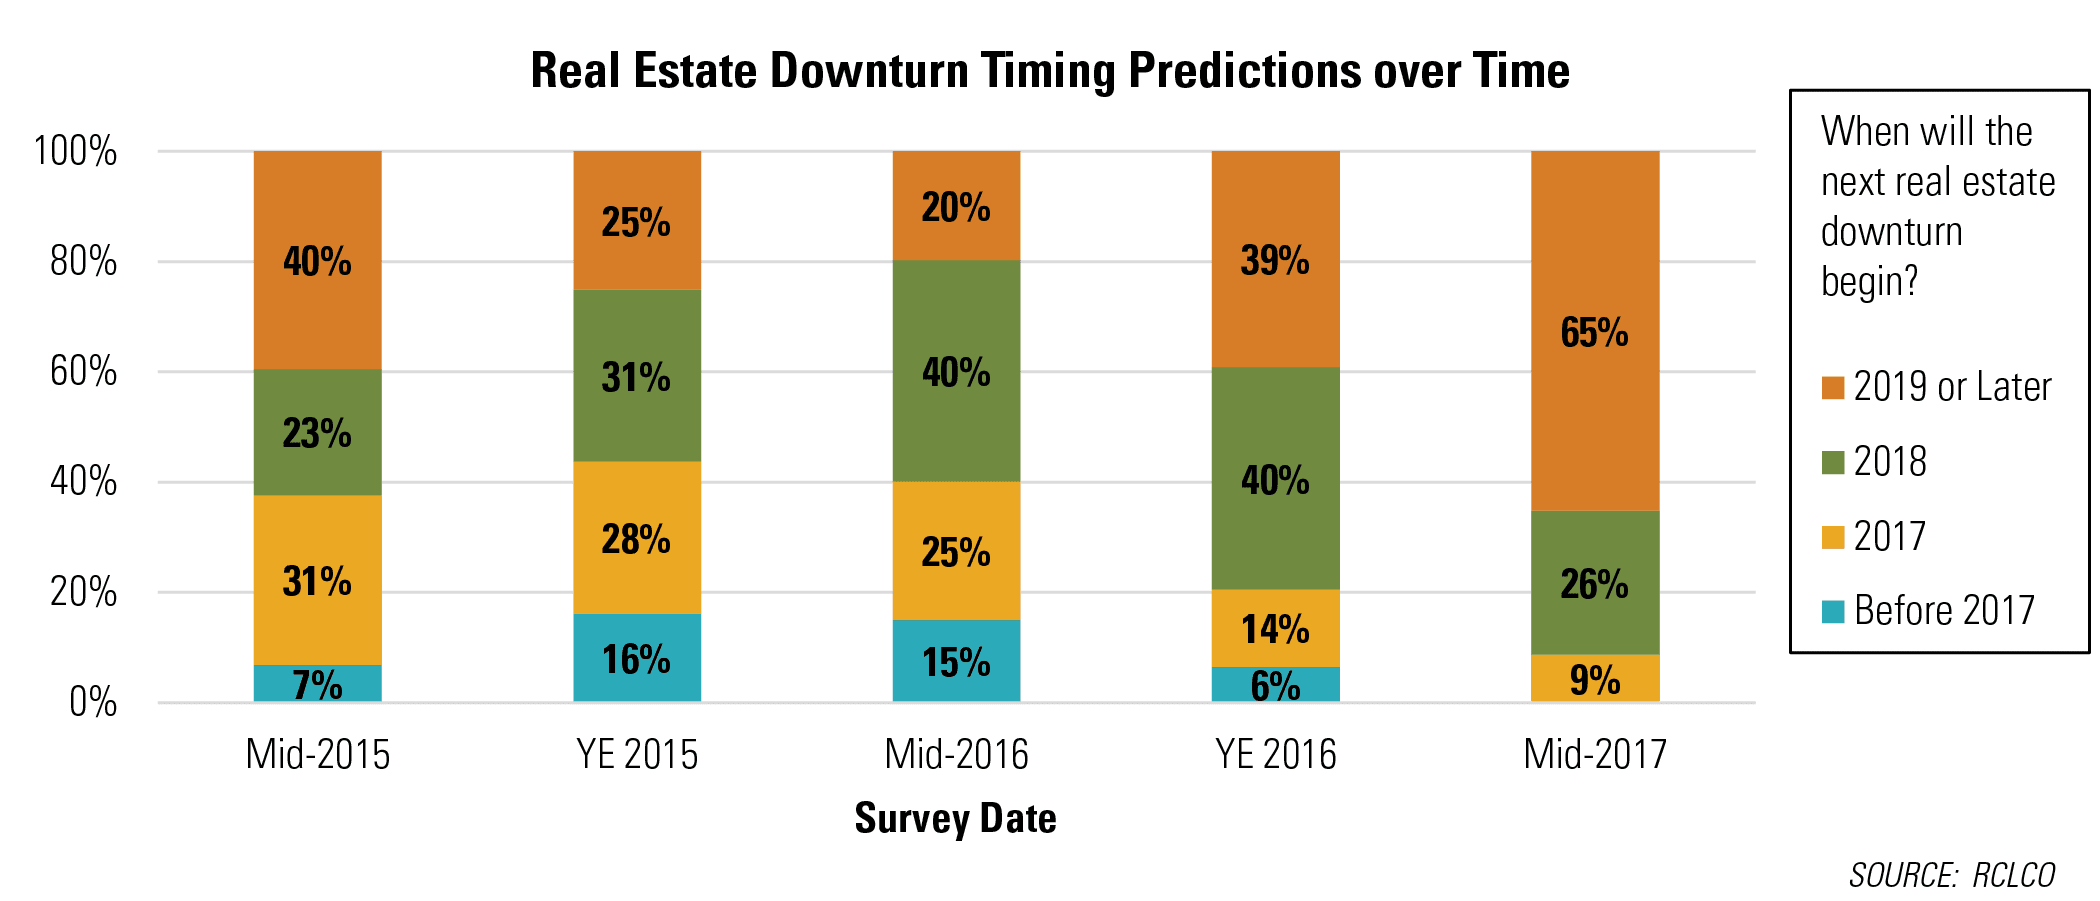 Real Estate Downturn Timing Predictions over Time